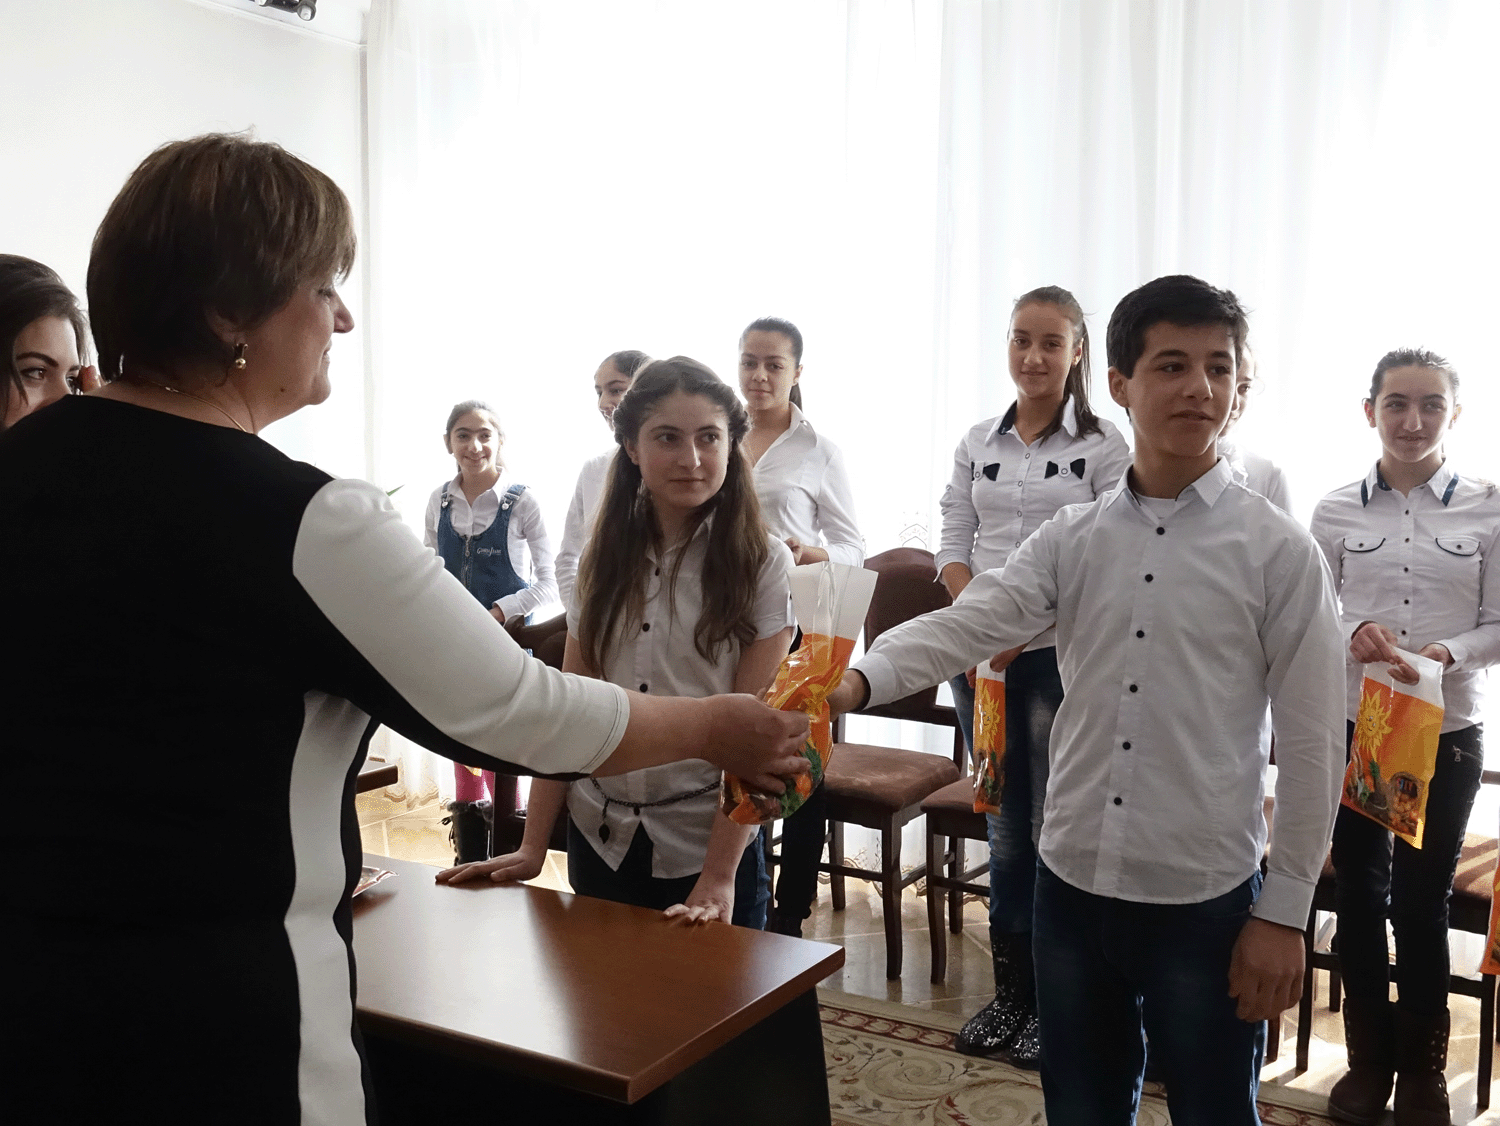 An eco-educational program was conducted in four schools in Yerevan